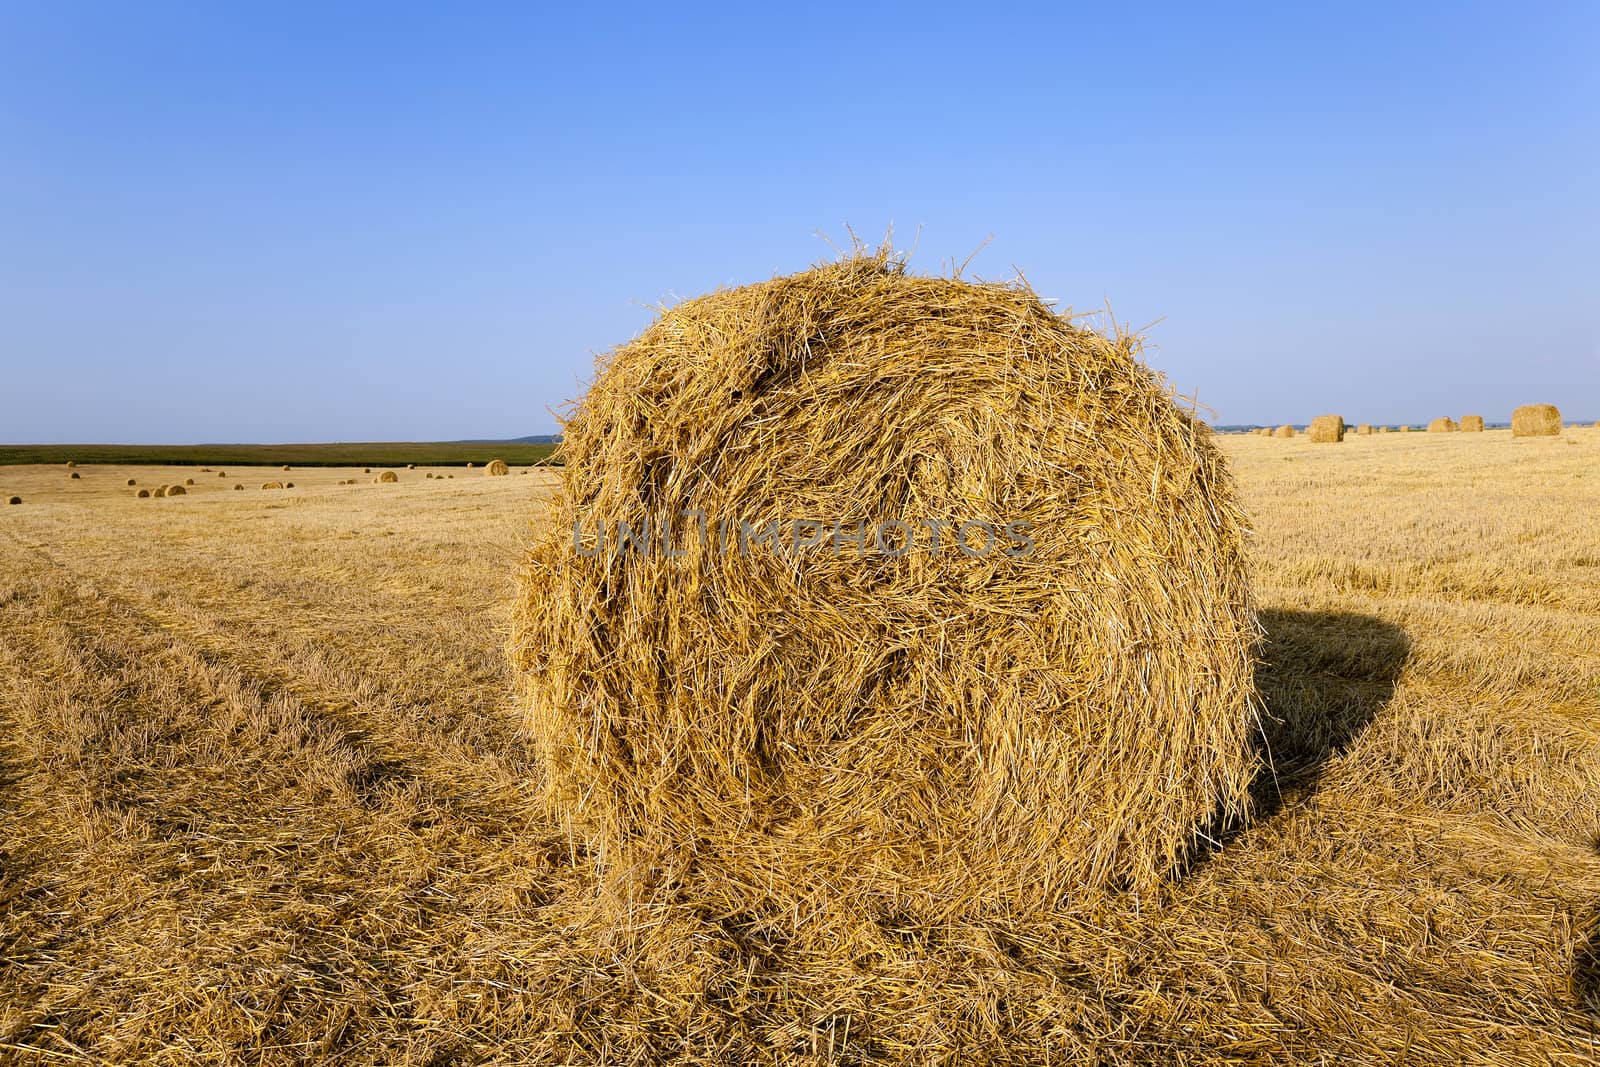  an agricultural field on which lie a straw stack after wheat harvesting